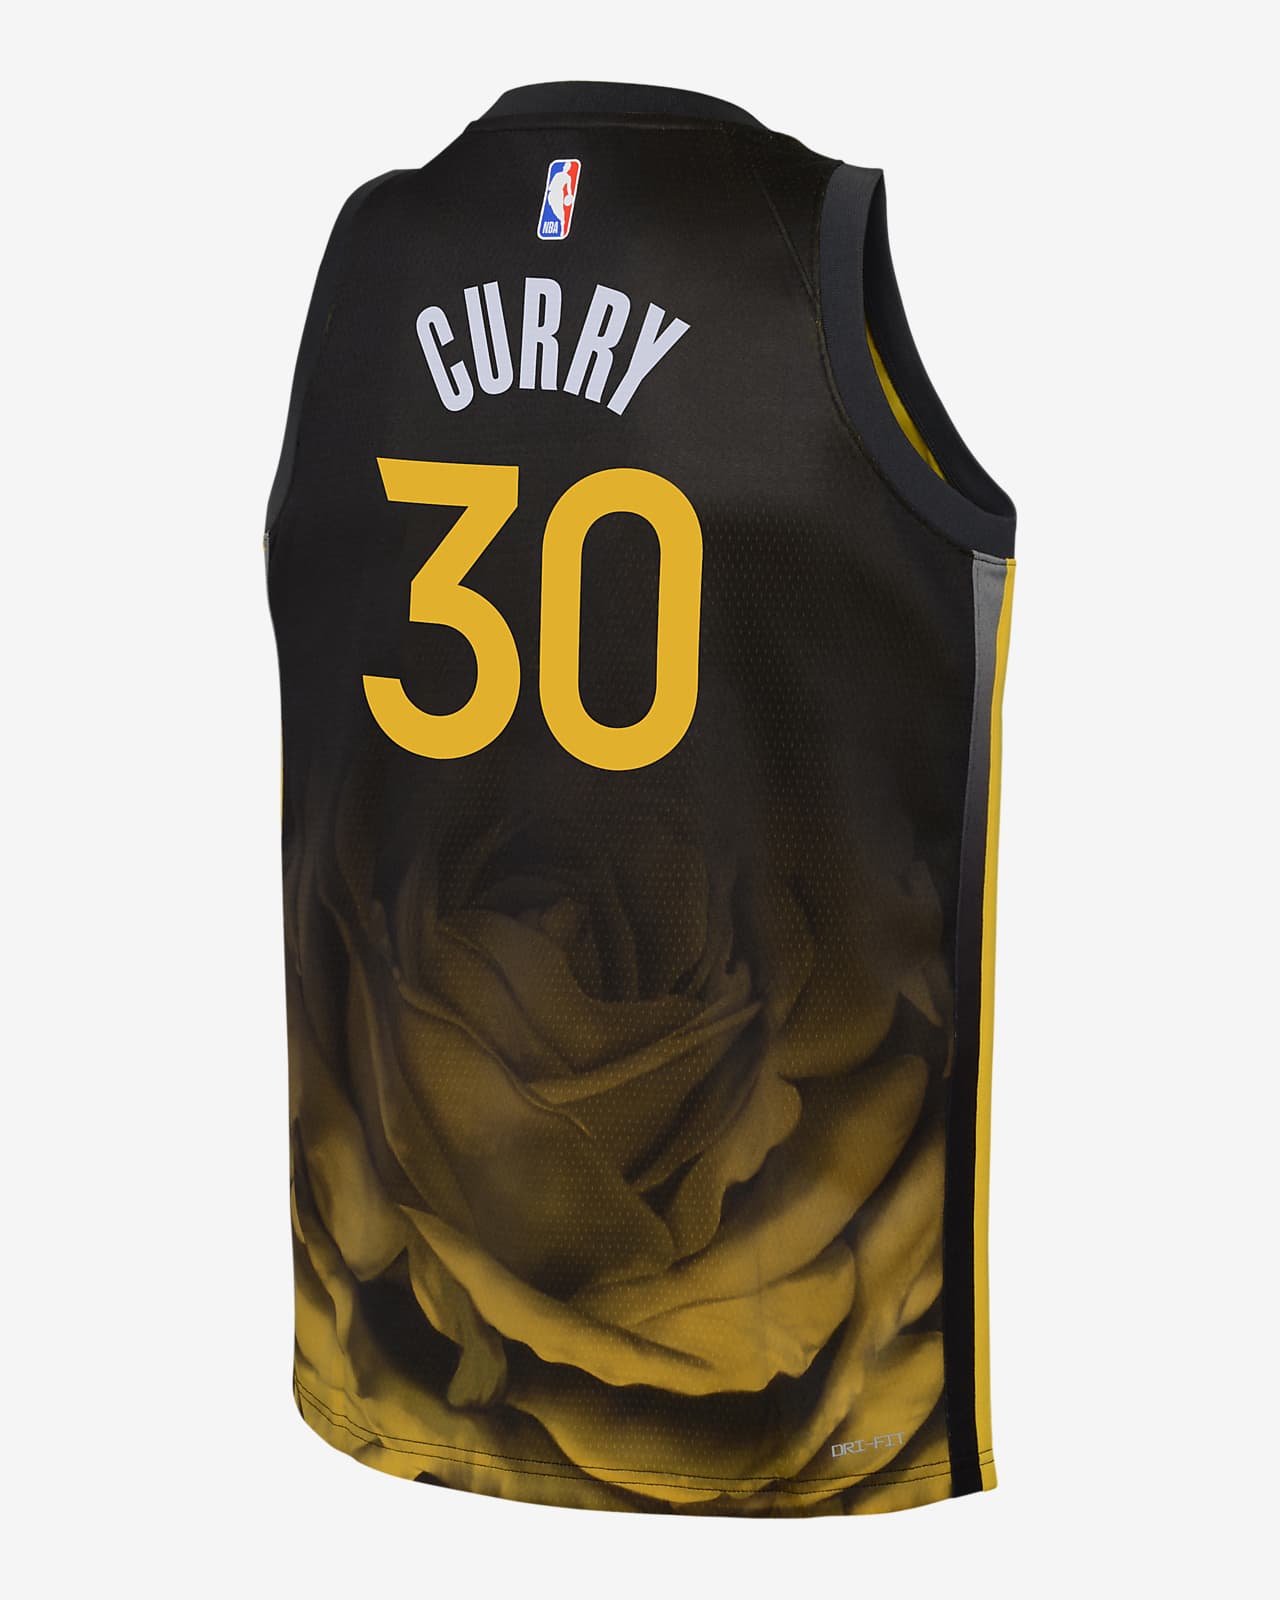 steph curry black and gold jersey